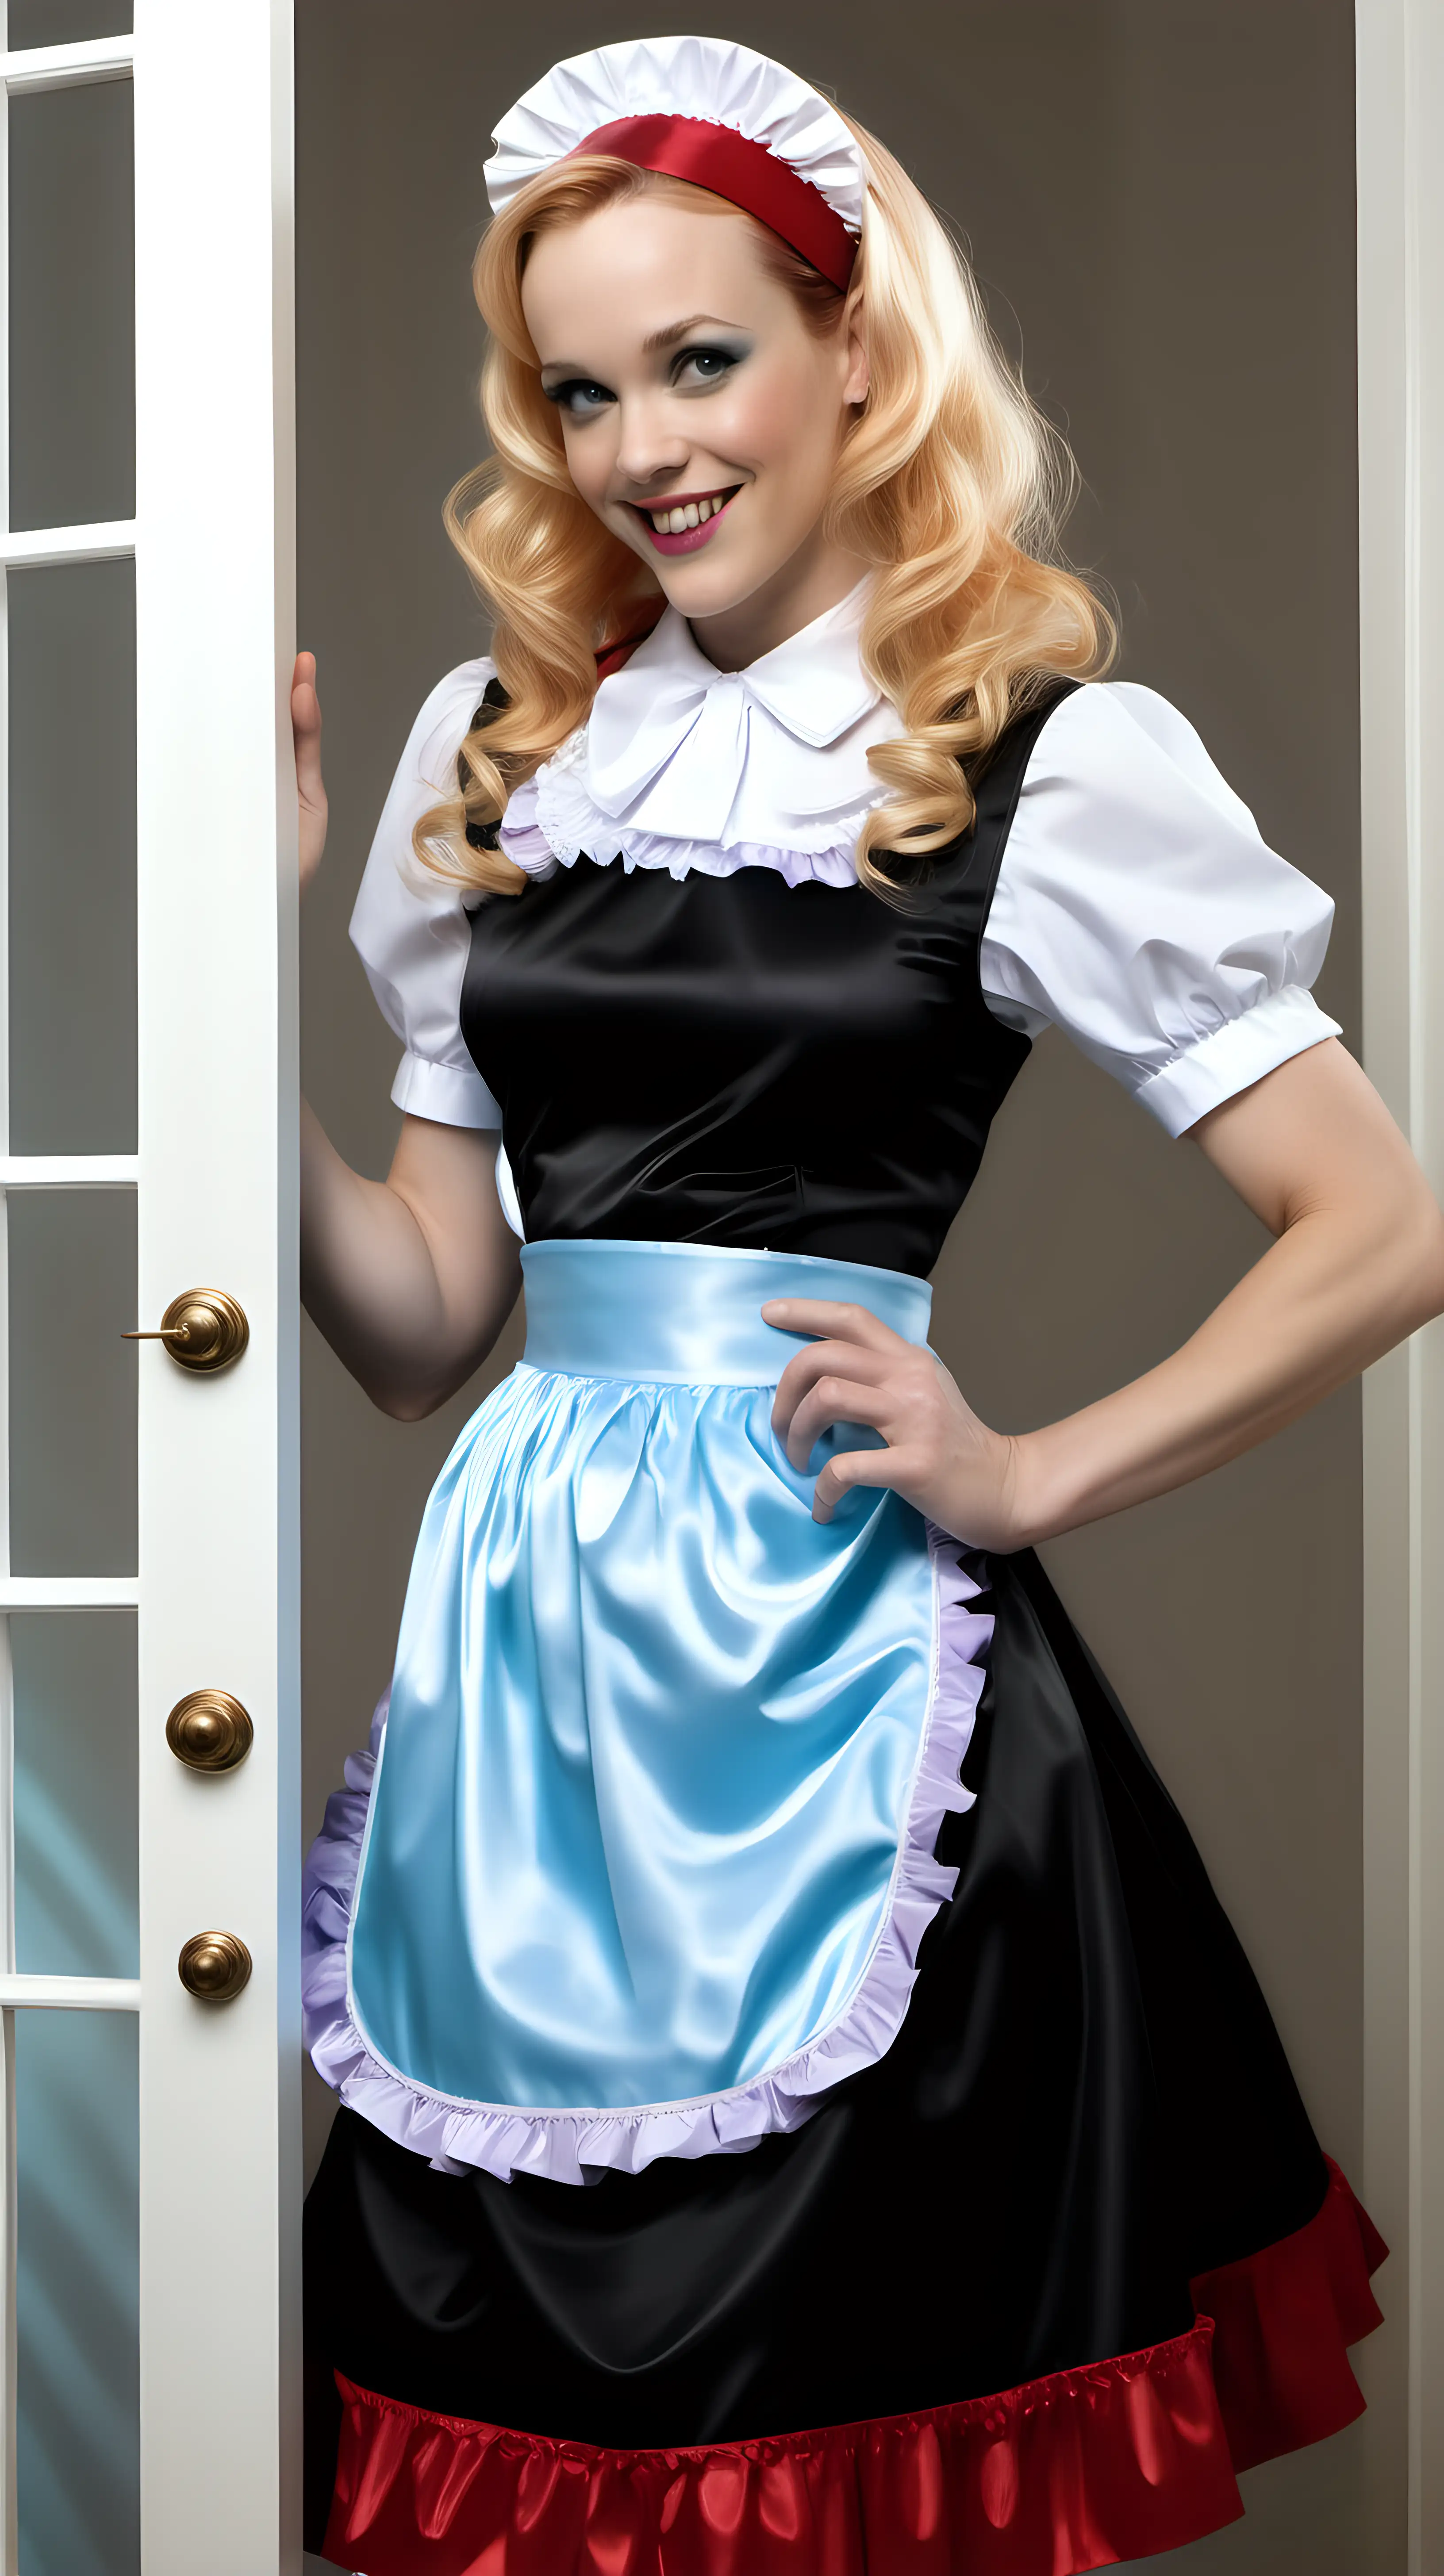 Retro French Maid Girls and Milfs in Crystal Silk Gowns